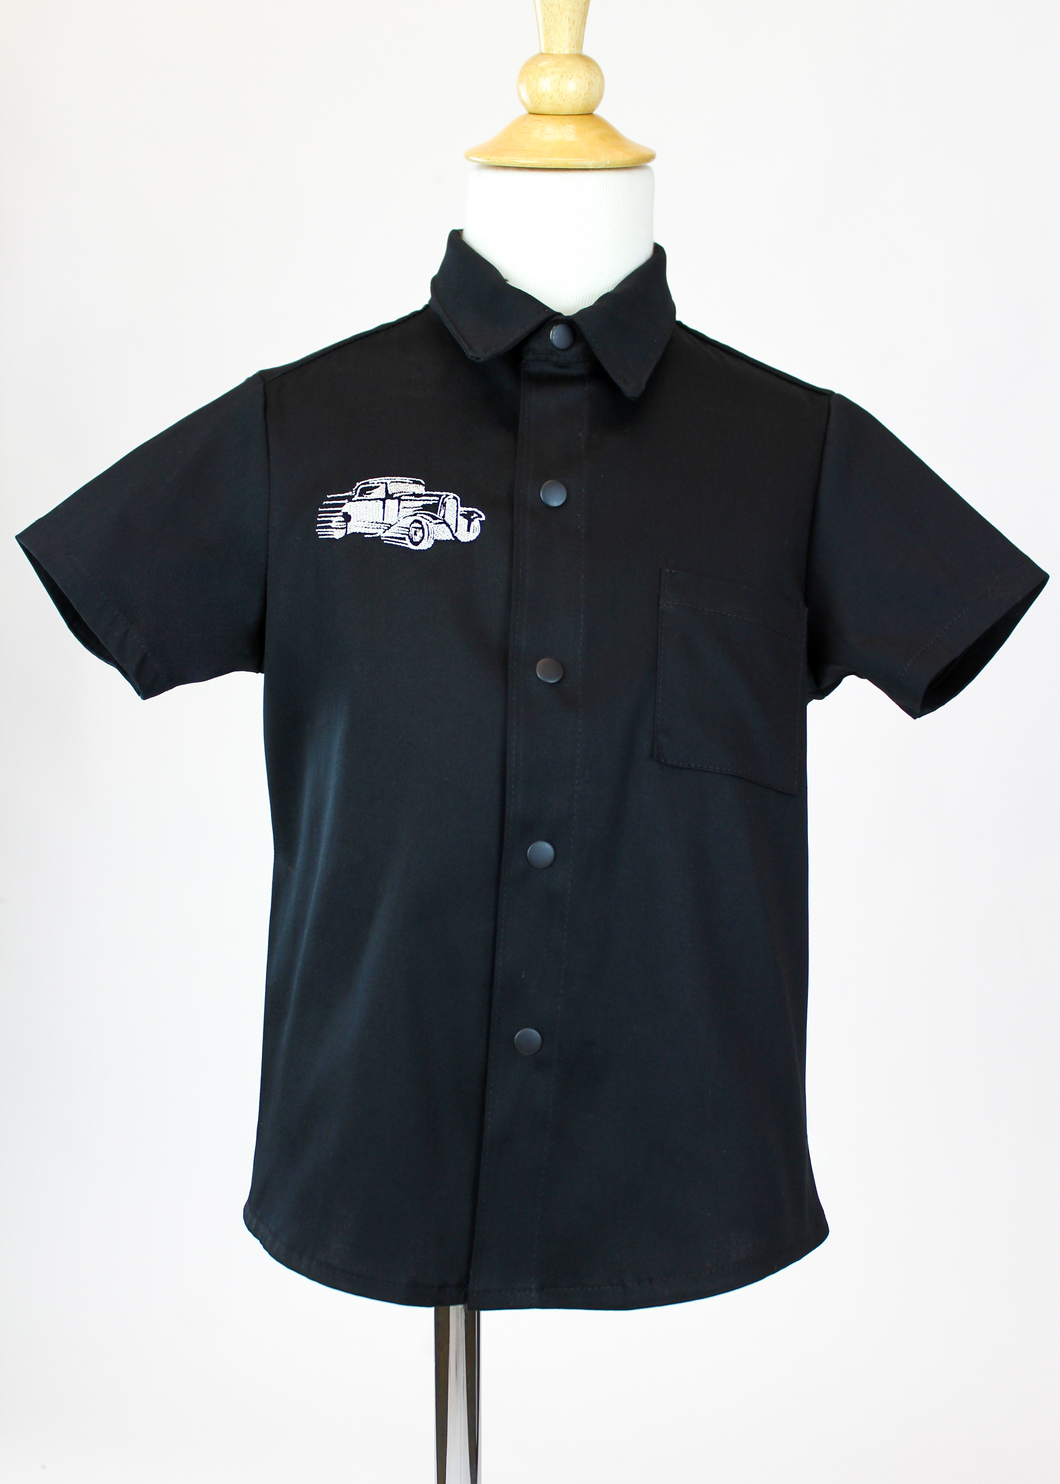 Boy's Embroidered Hot Rod Top